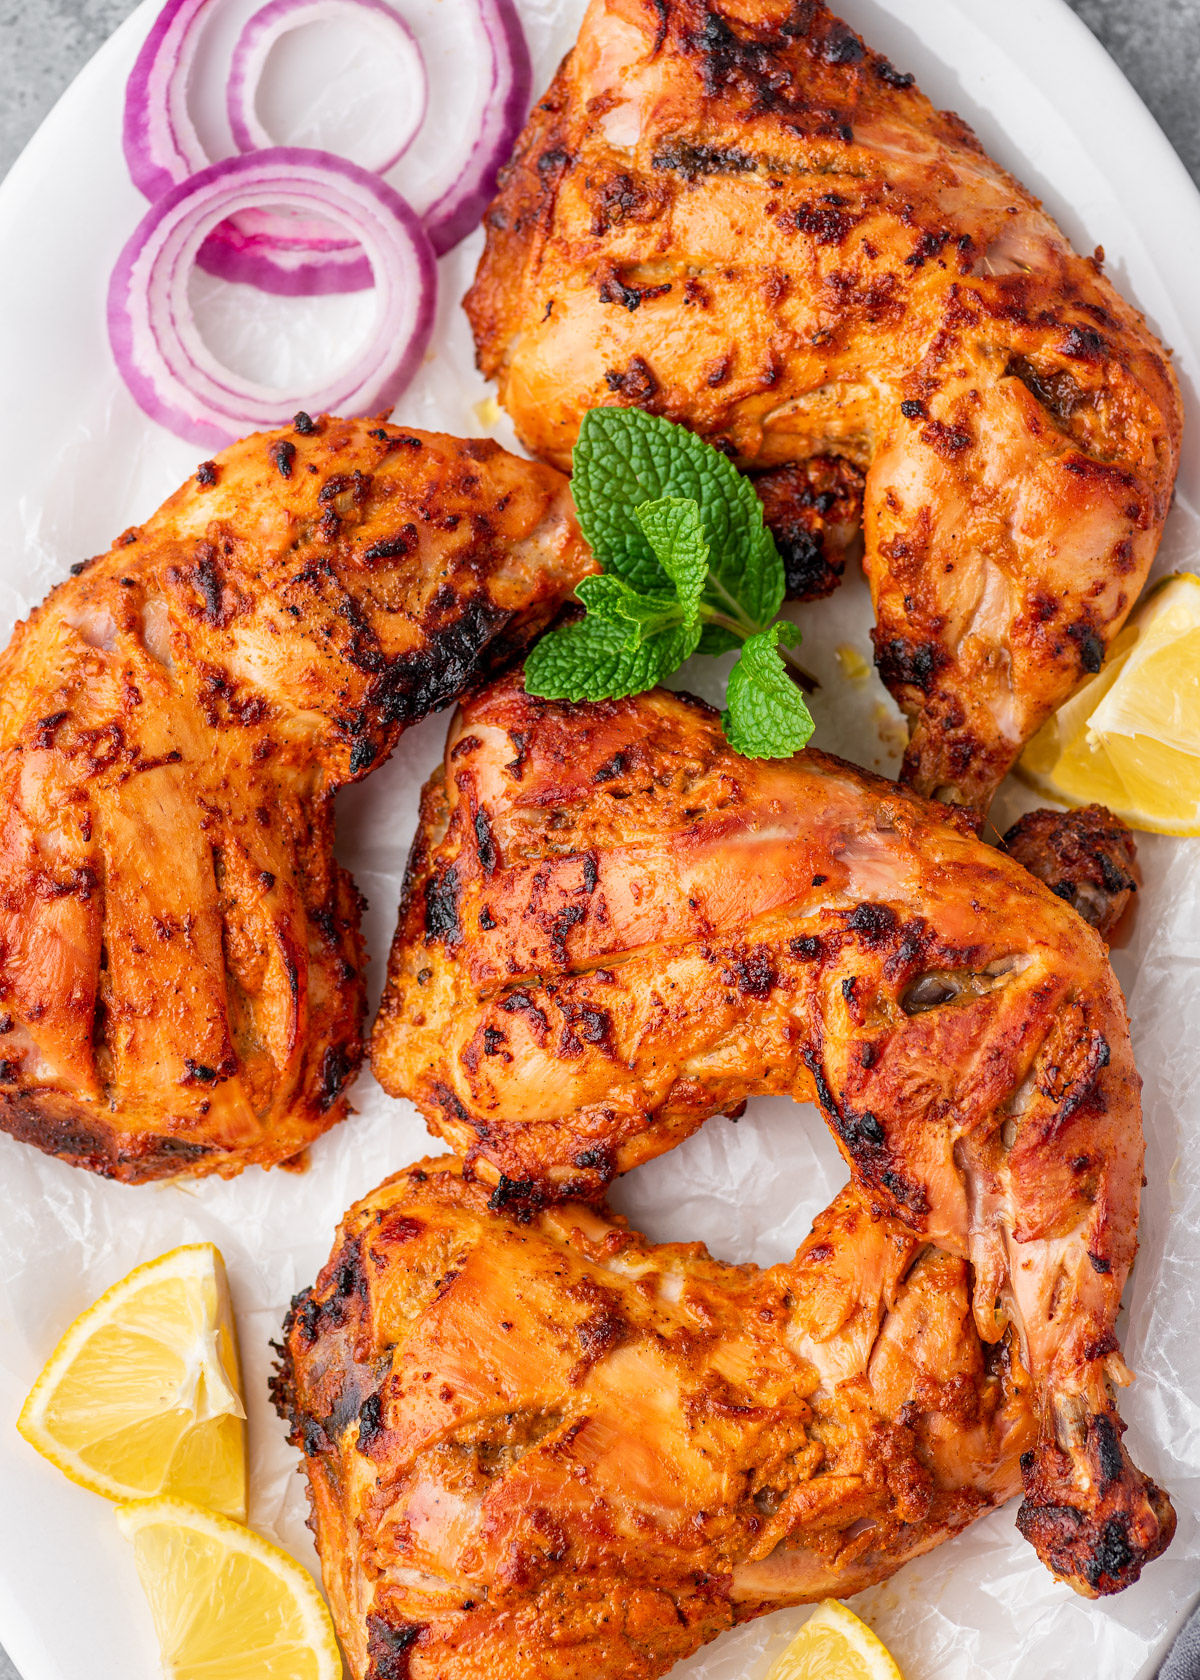 Indian Tandoori Chicken Photograph by Ezume Images - Pixels